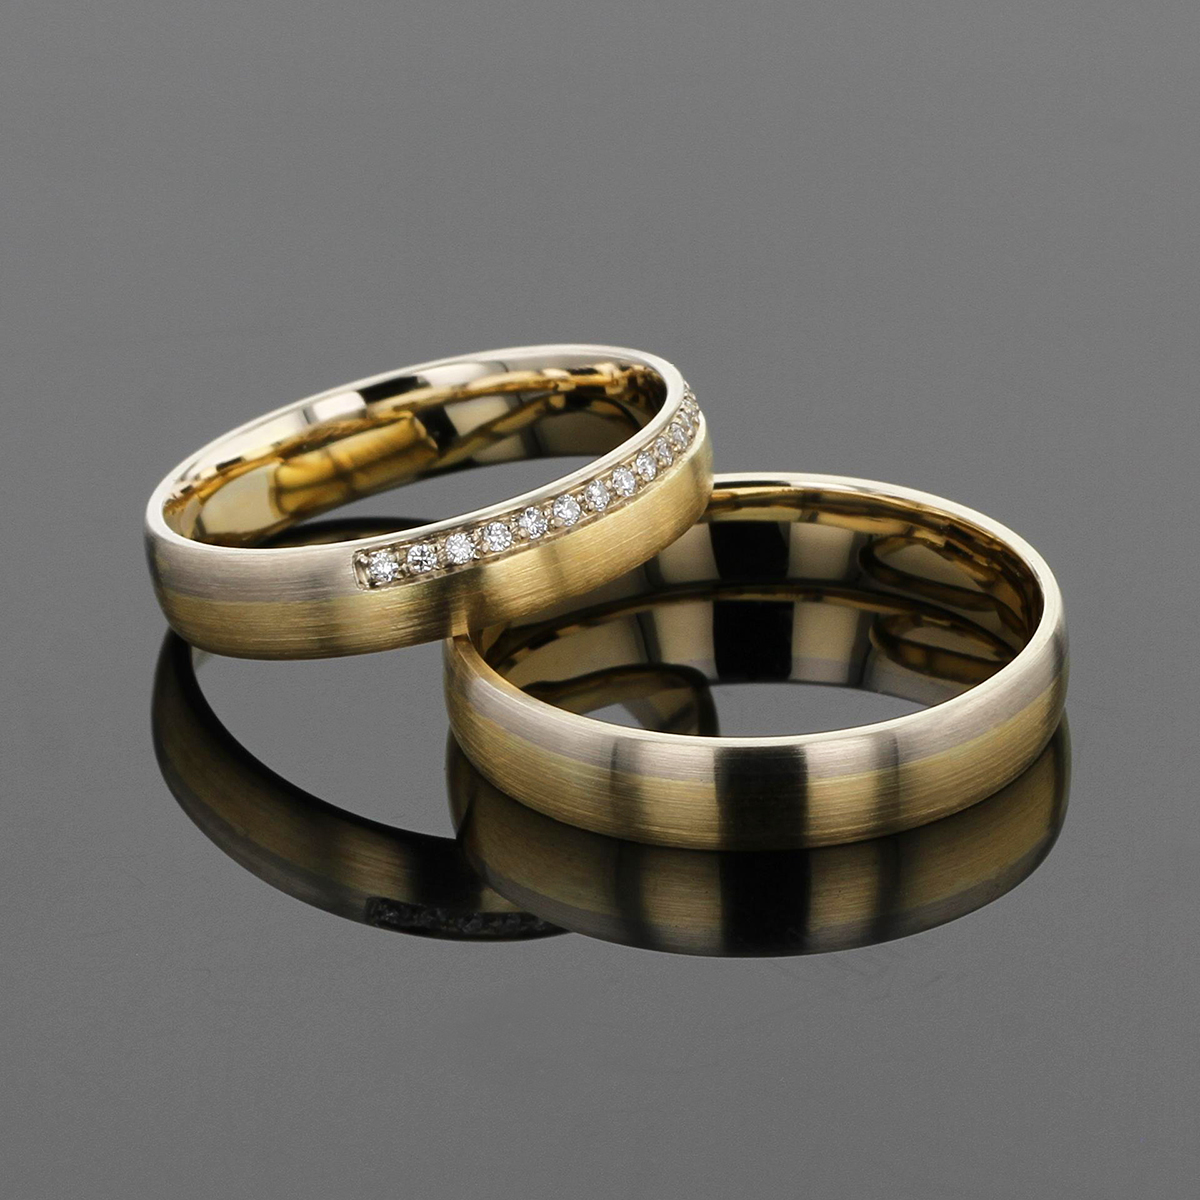 Wedding rings made in Mauritius